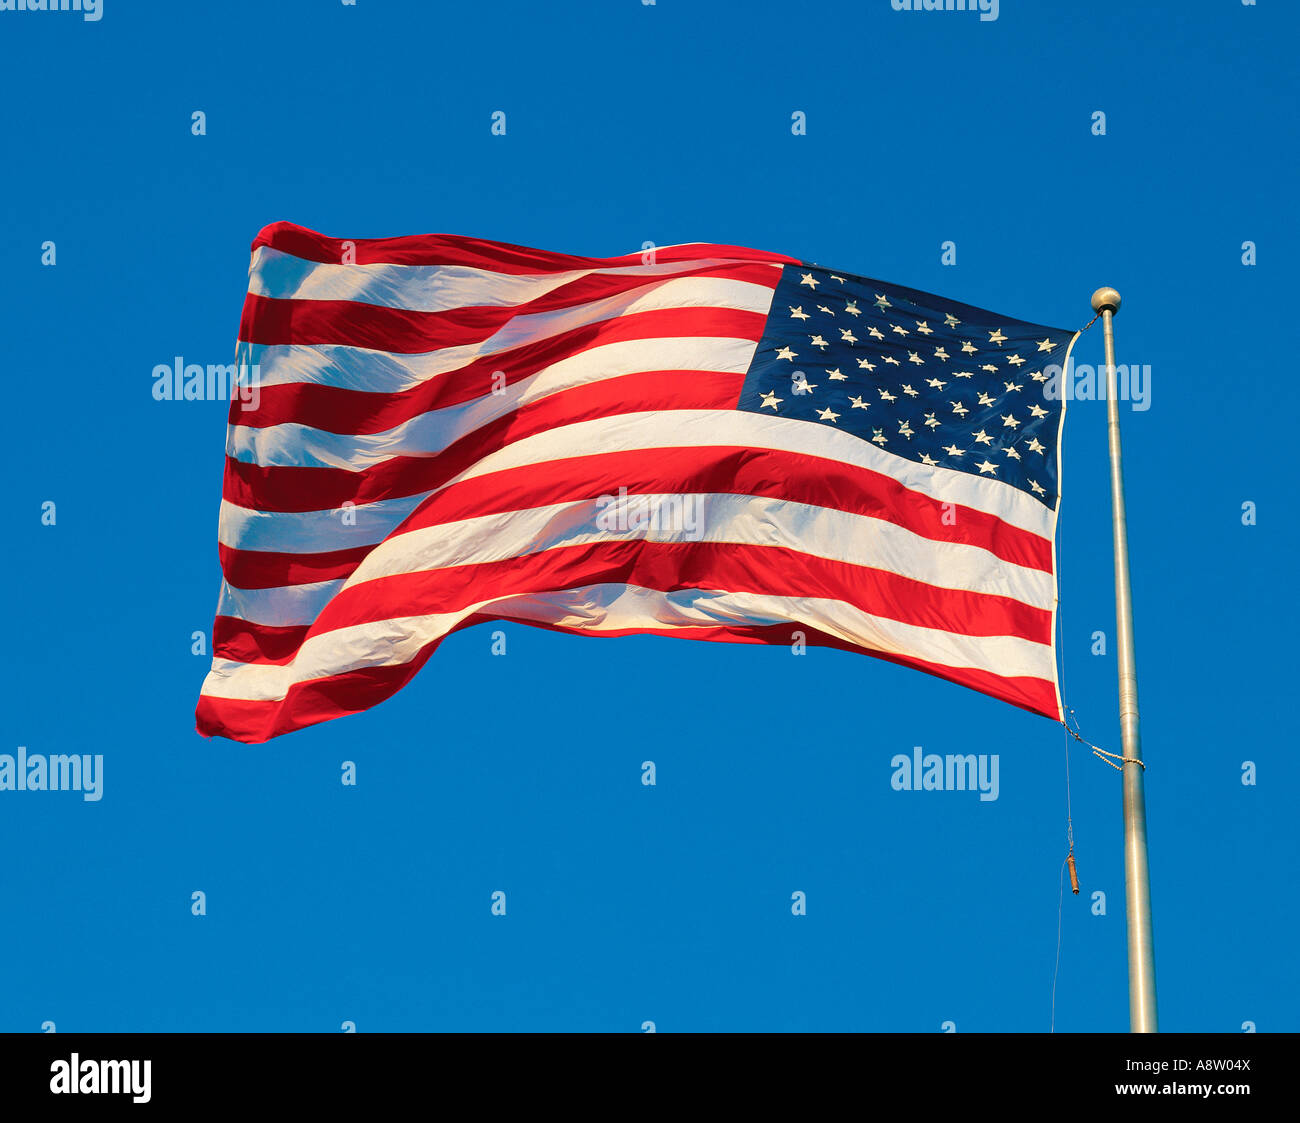 United States of America flag. "Stars and Stripes". Stock Photo